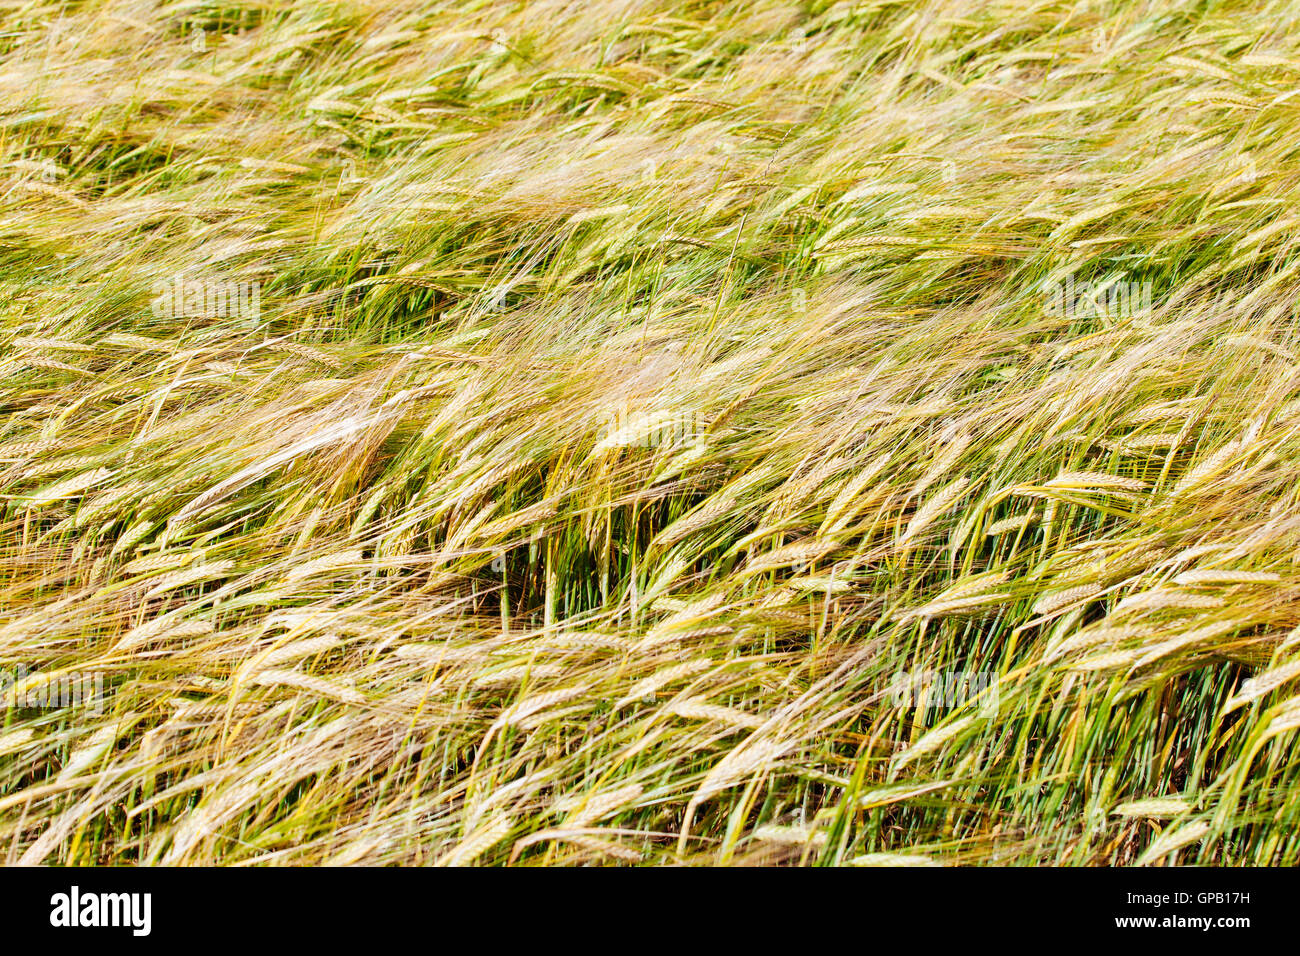 Wheat crop blowing in the wind. Stock Photo